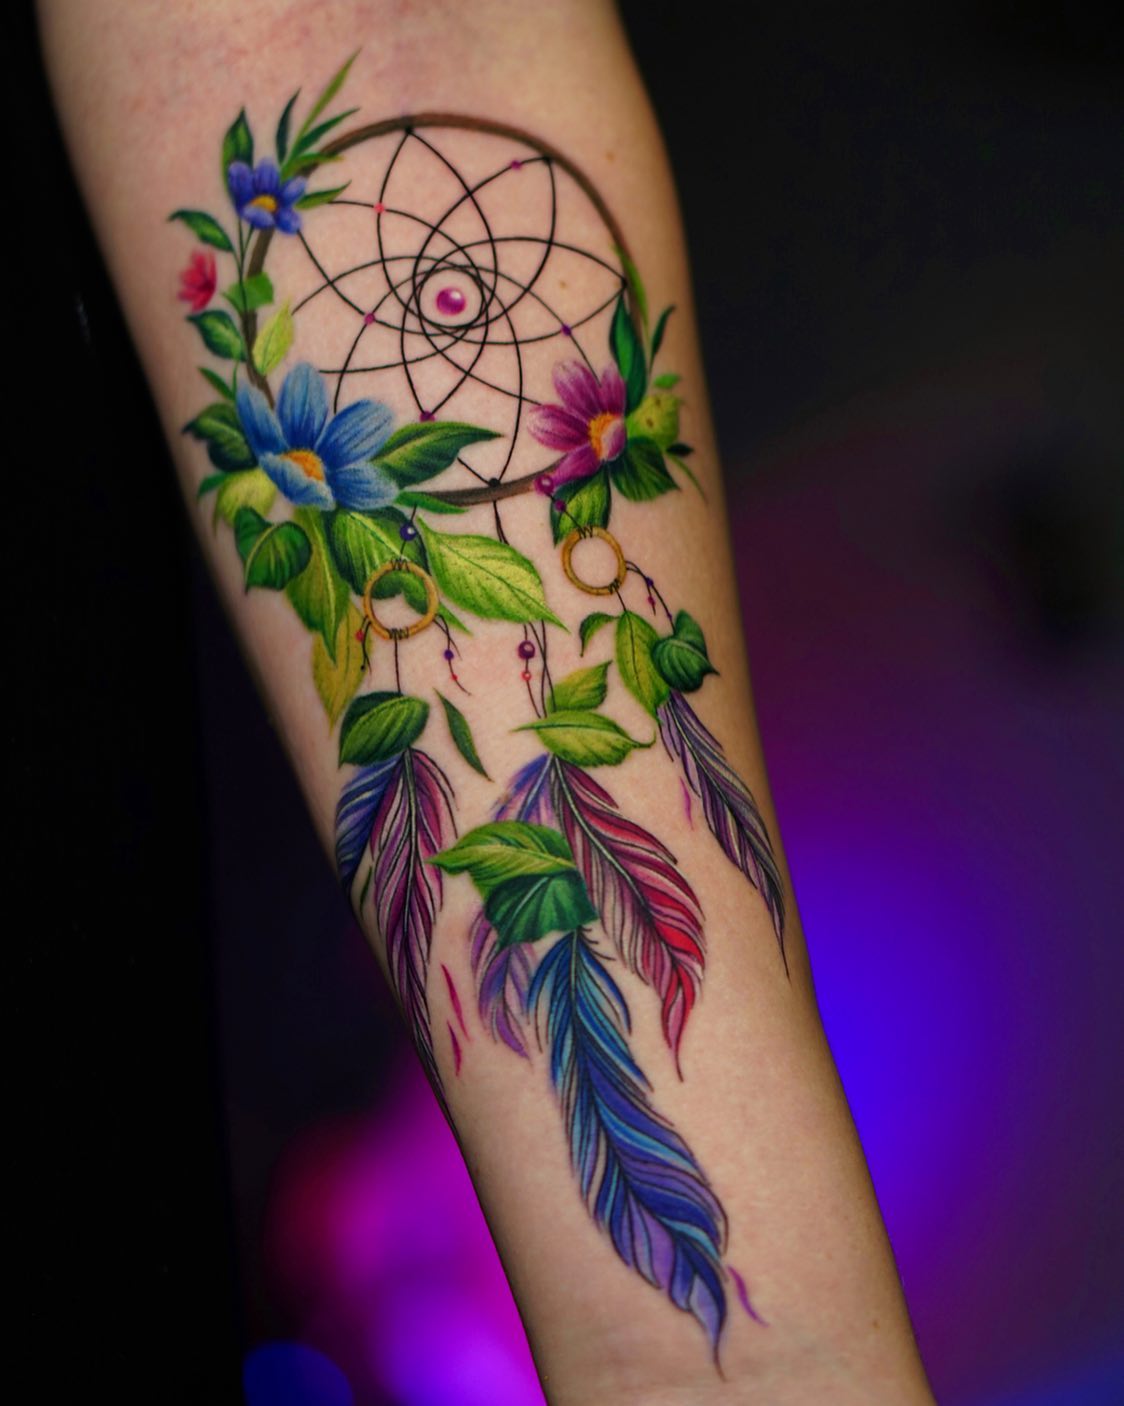 Traditional dream catcher tattoo may sound simple, so let's add some creativity to it! If you are into the nature, let's combine these two. A dream catcher tattoo with flowers and leaves is a great way to show your appreciation for nature, especially if you love flowers.